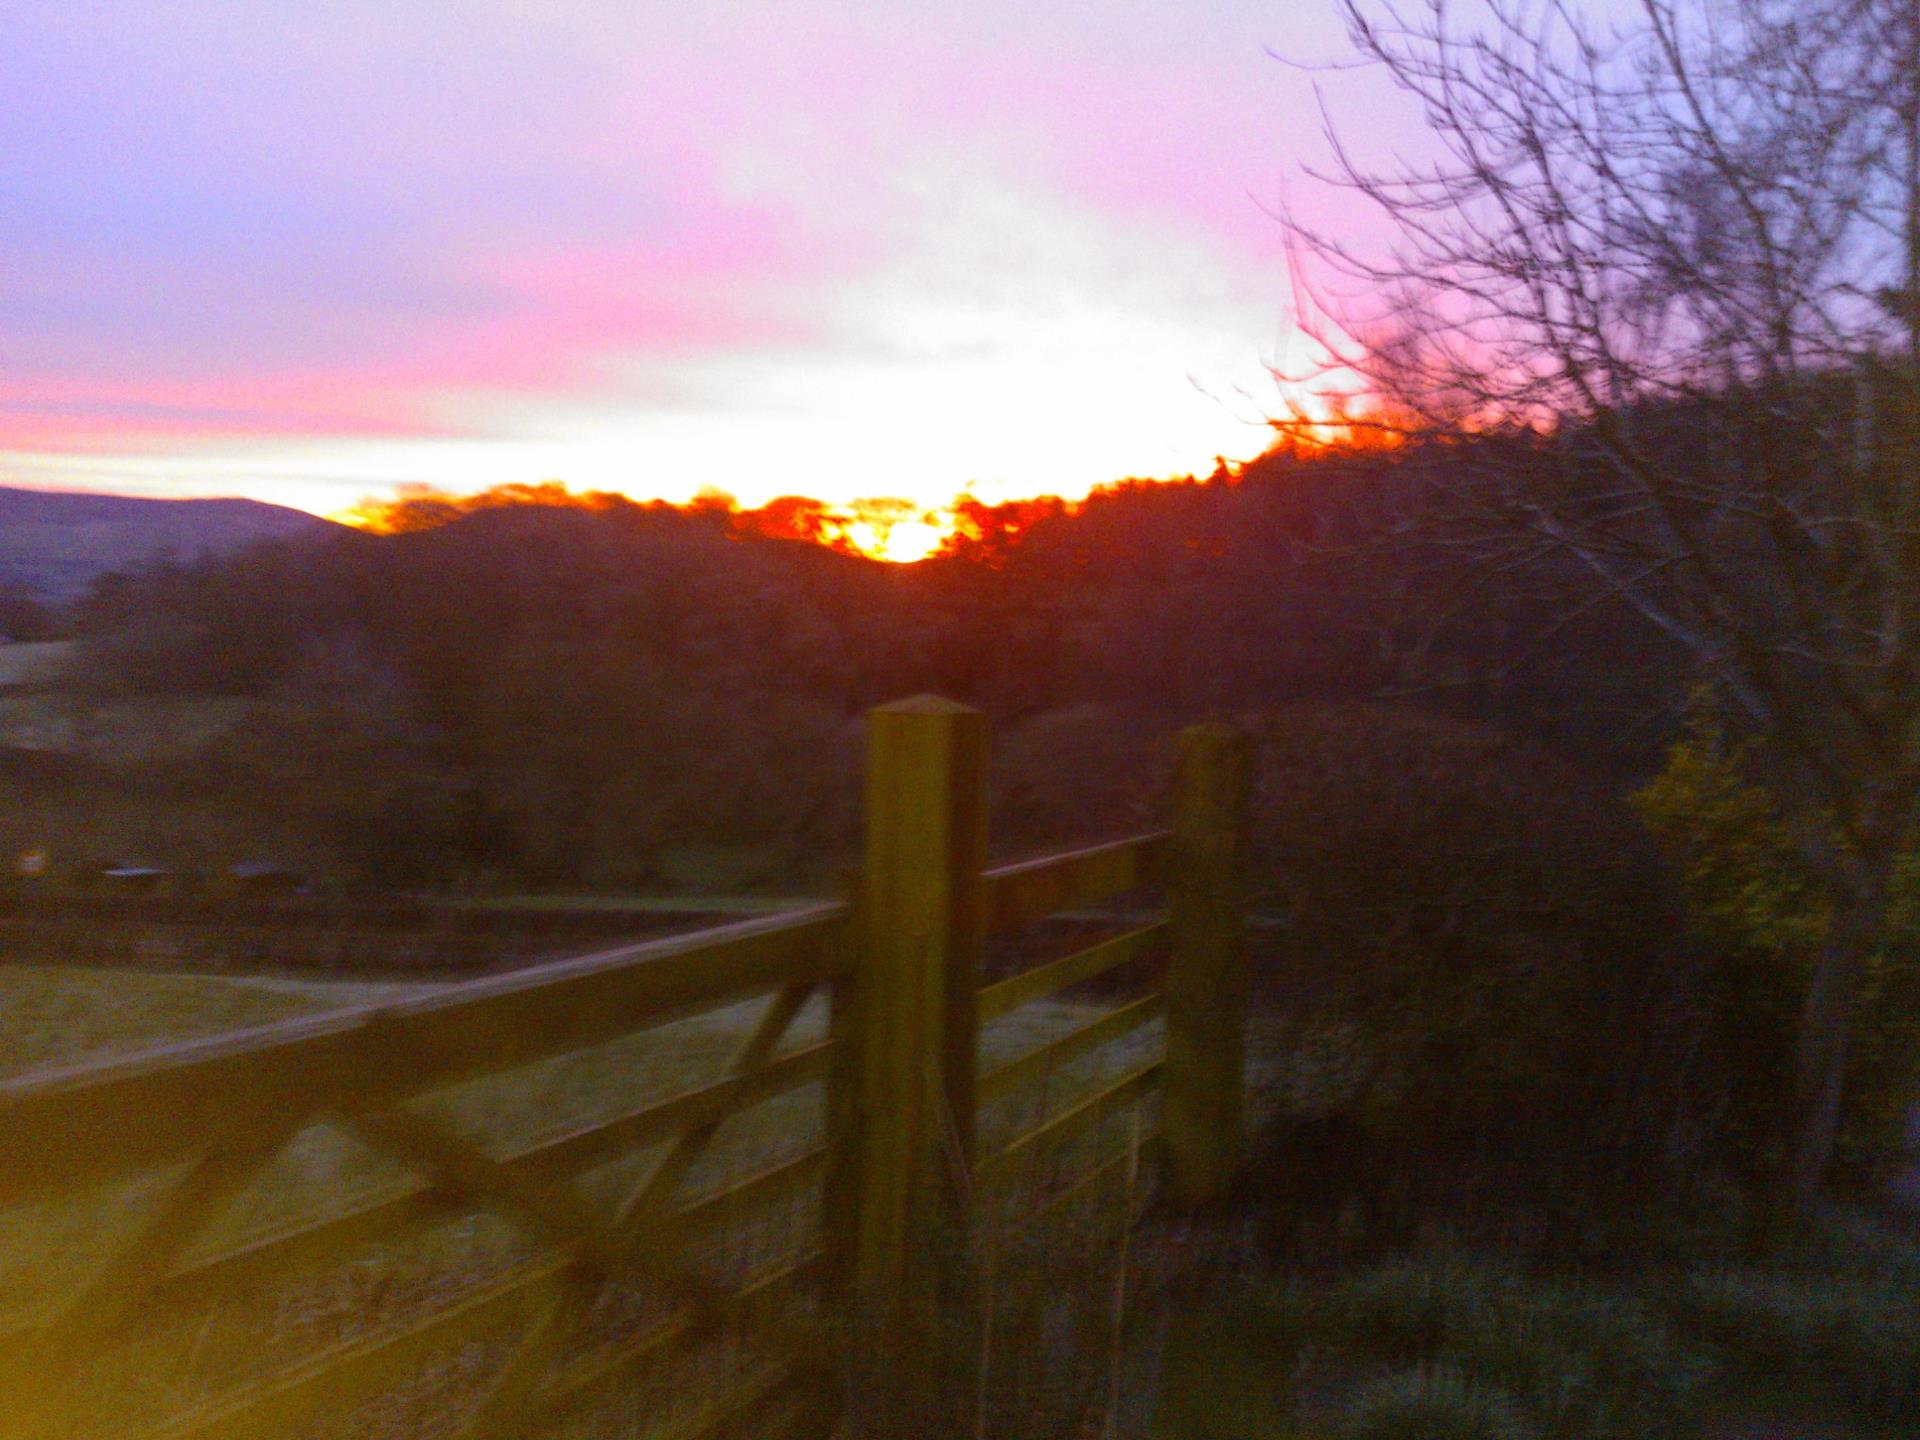 Sunrise over the Clwydians